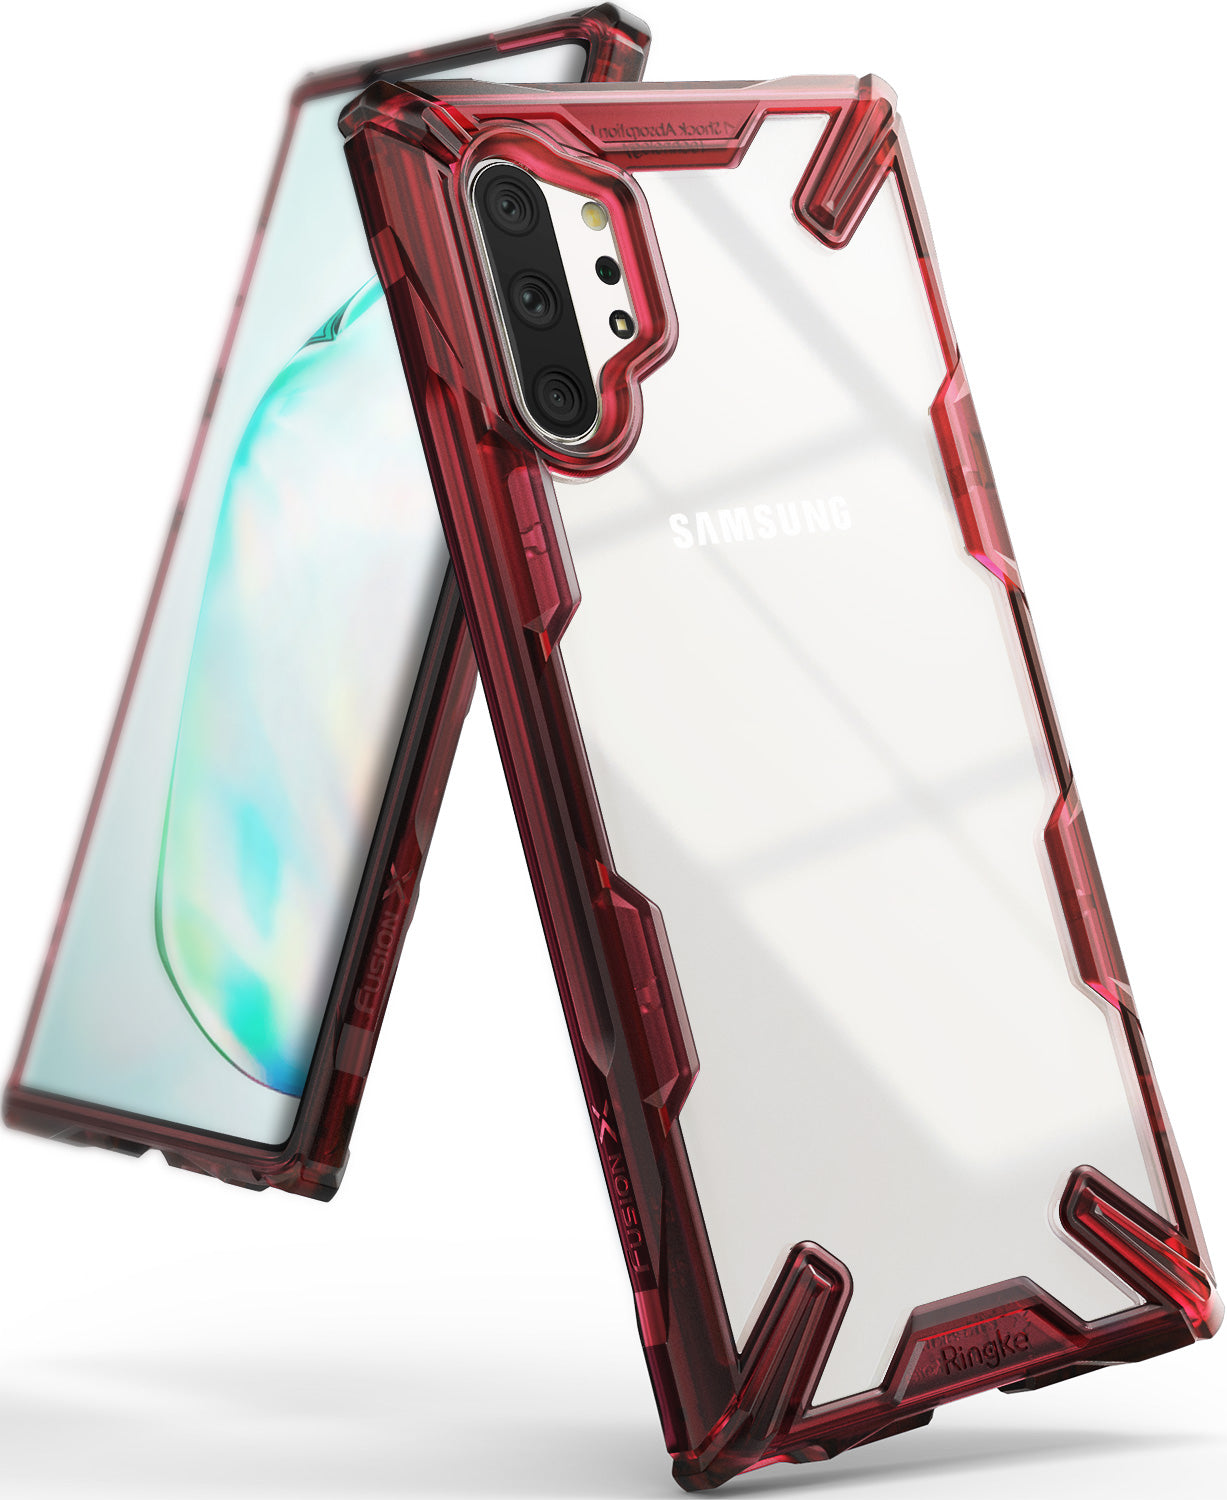 Ringke Fusion-X for Galaxy Note 10 Plus 5G (2019) Ruby Red